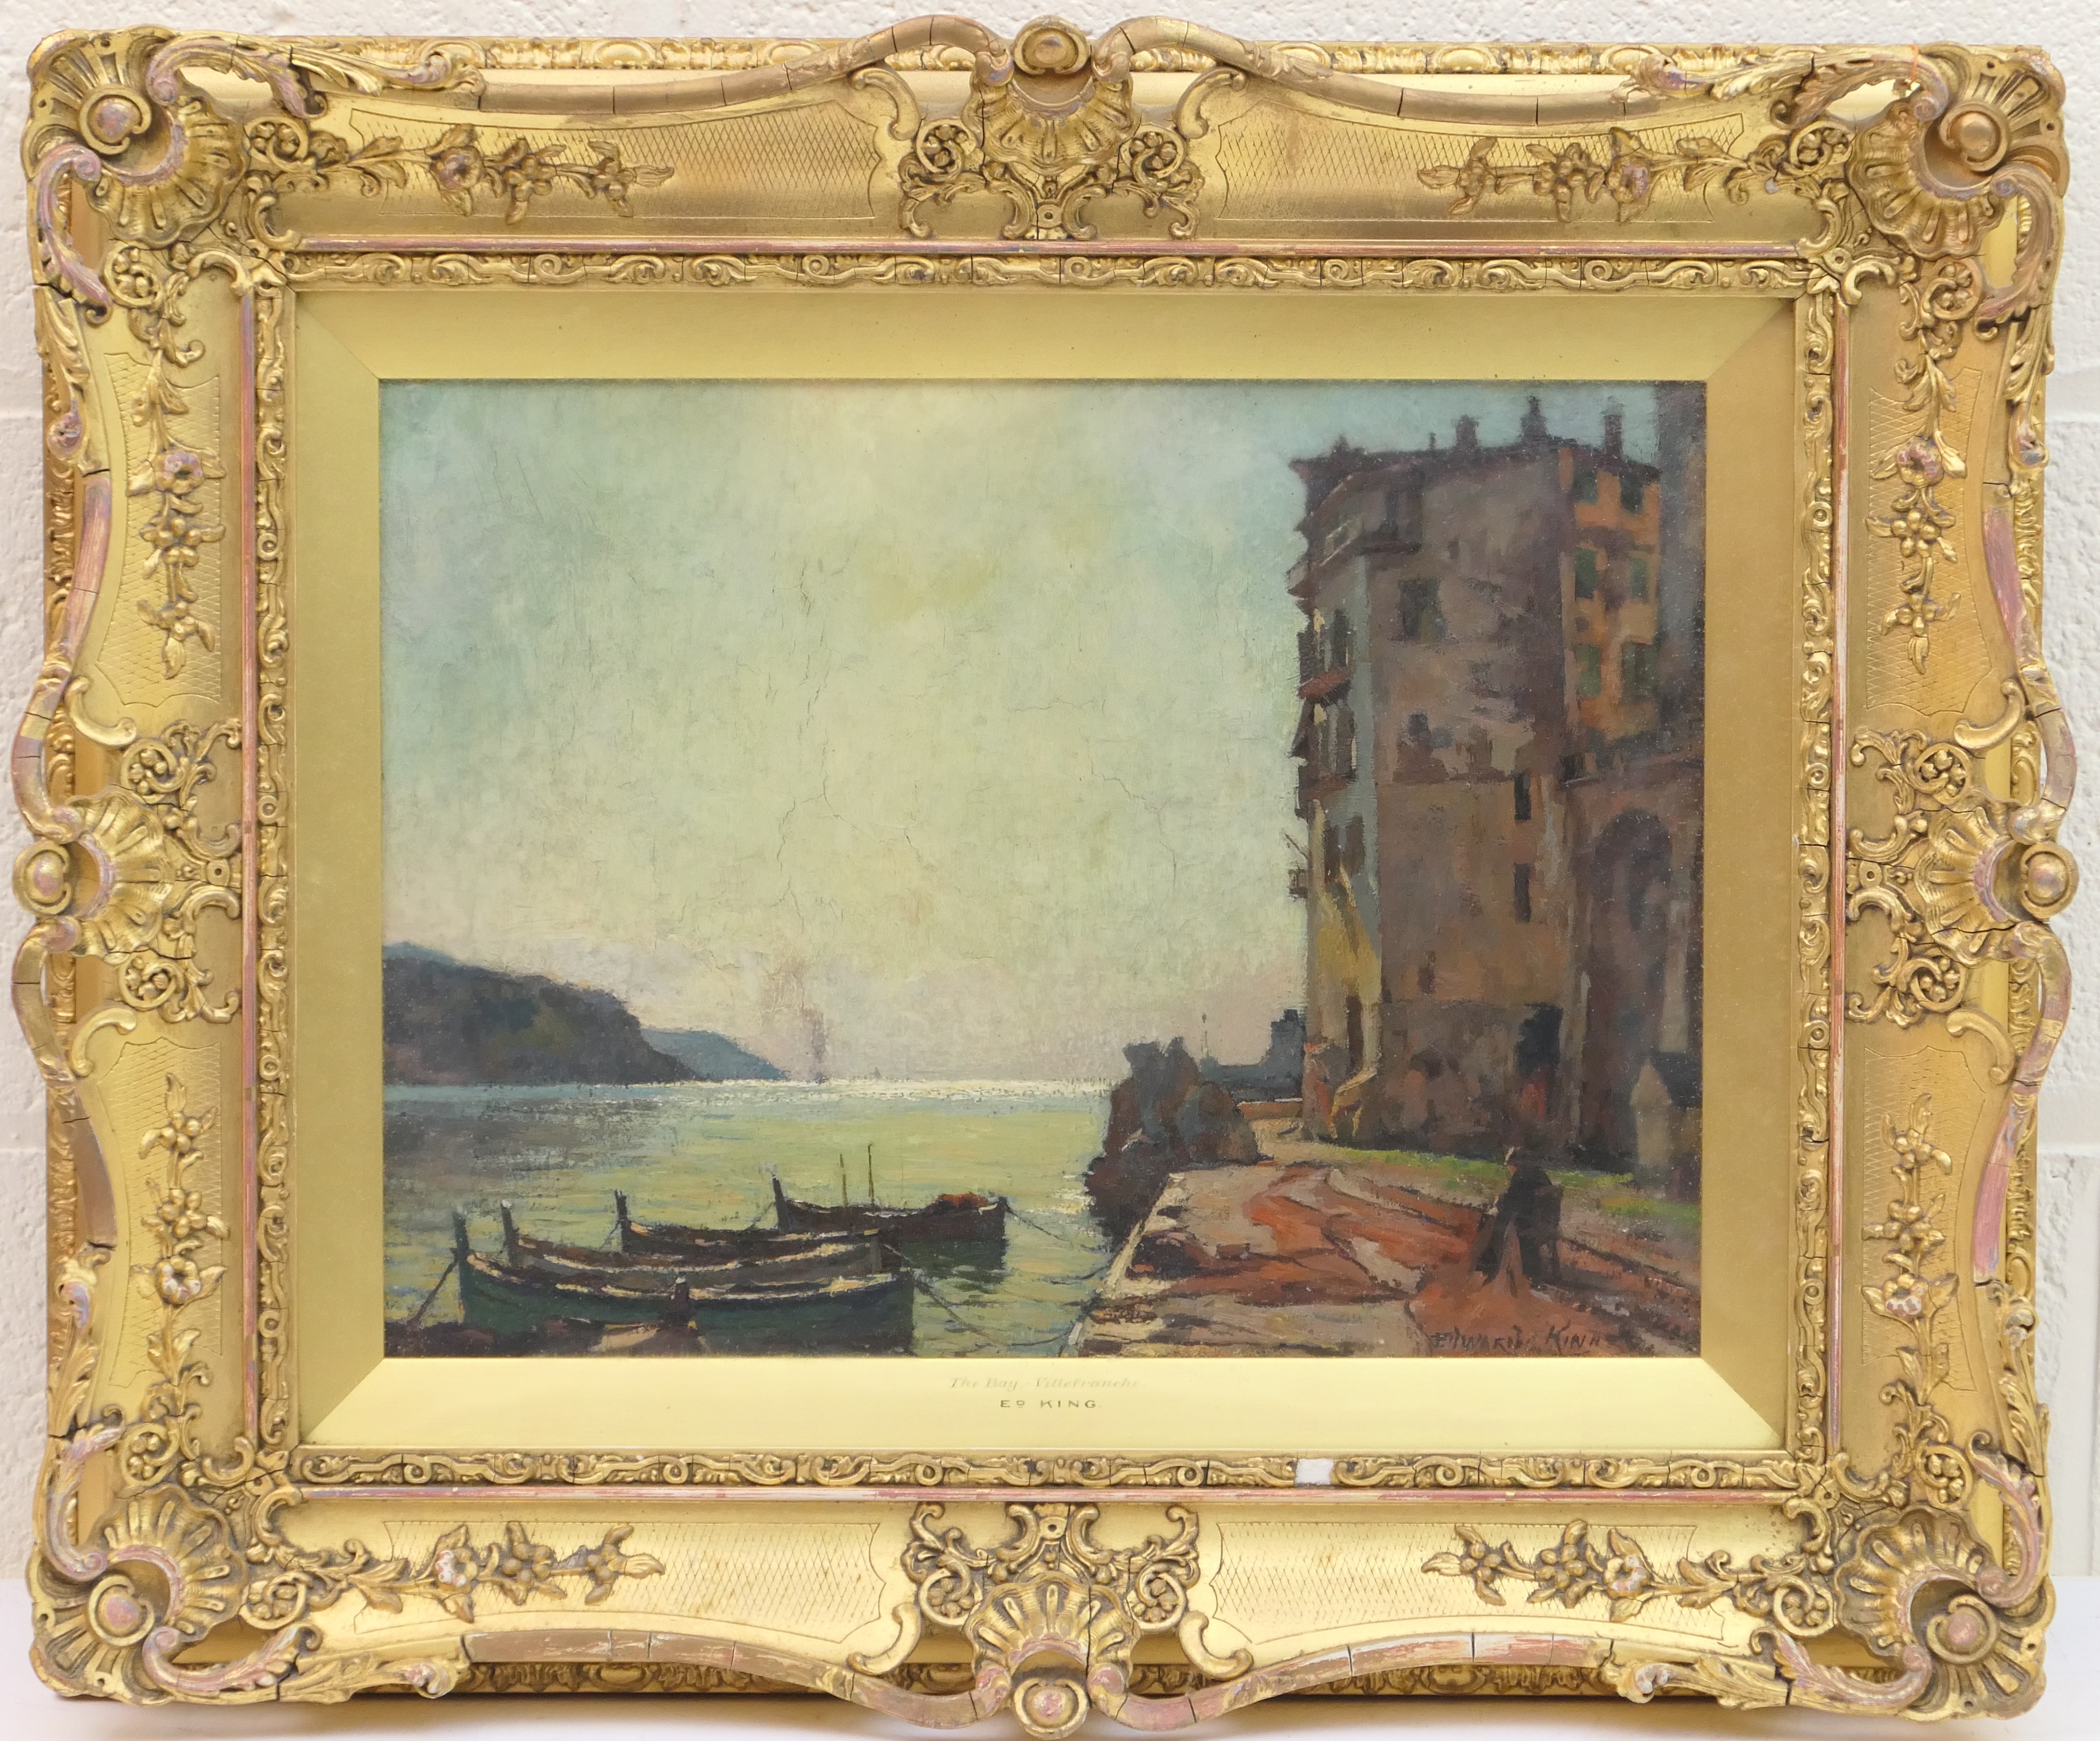 Edward R King (1863-?), Pair, the Bay, and Old Buildings, Villefranche, oils on canvas, signed,